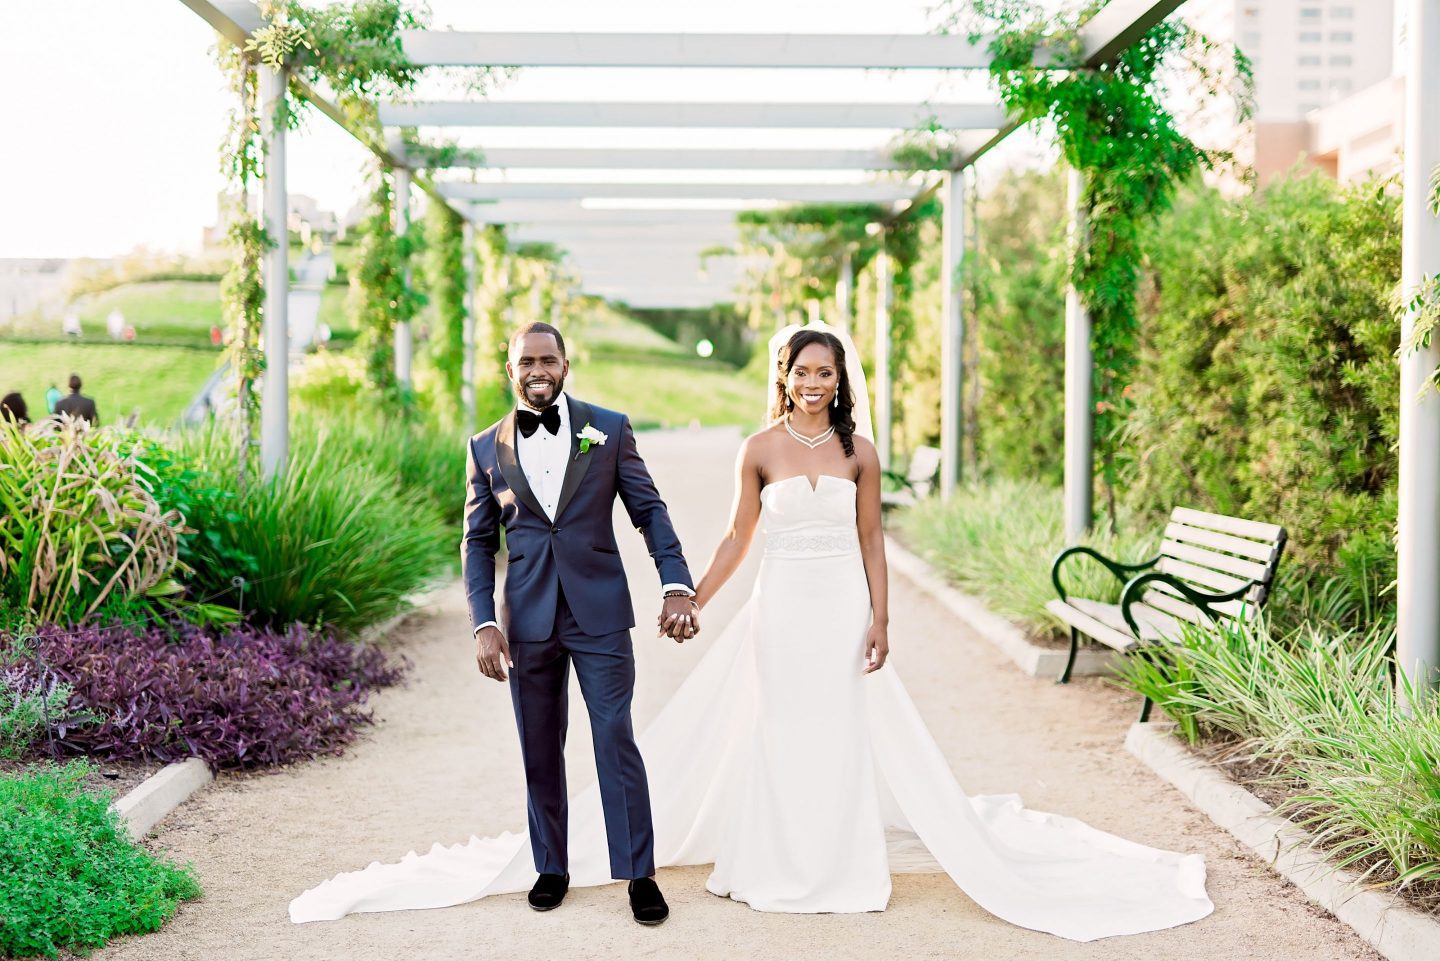 Houston, TX Wedding at the Buffalo Soldier Museum